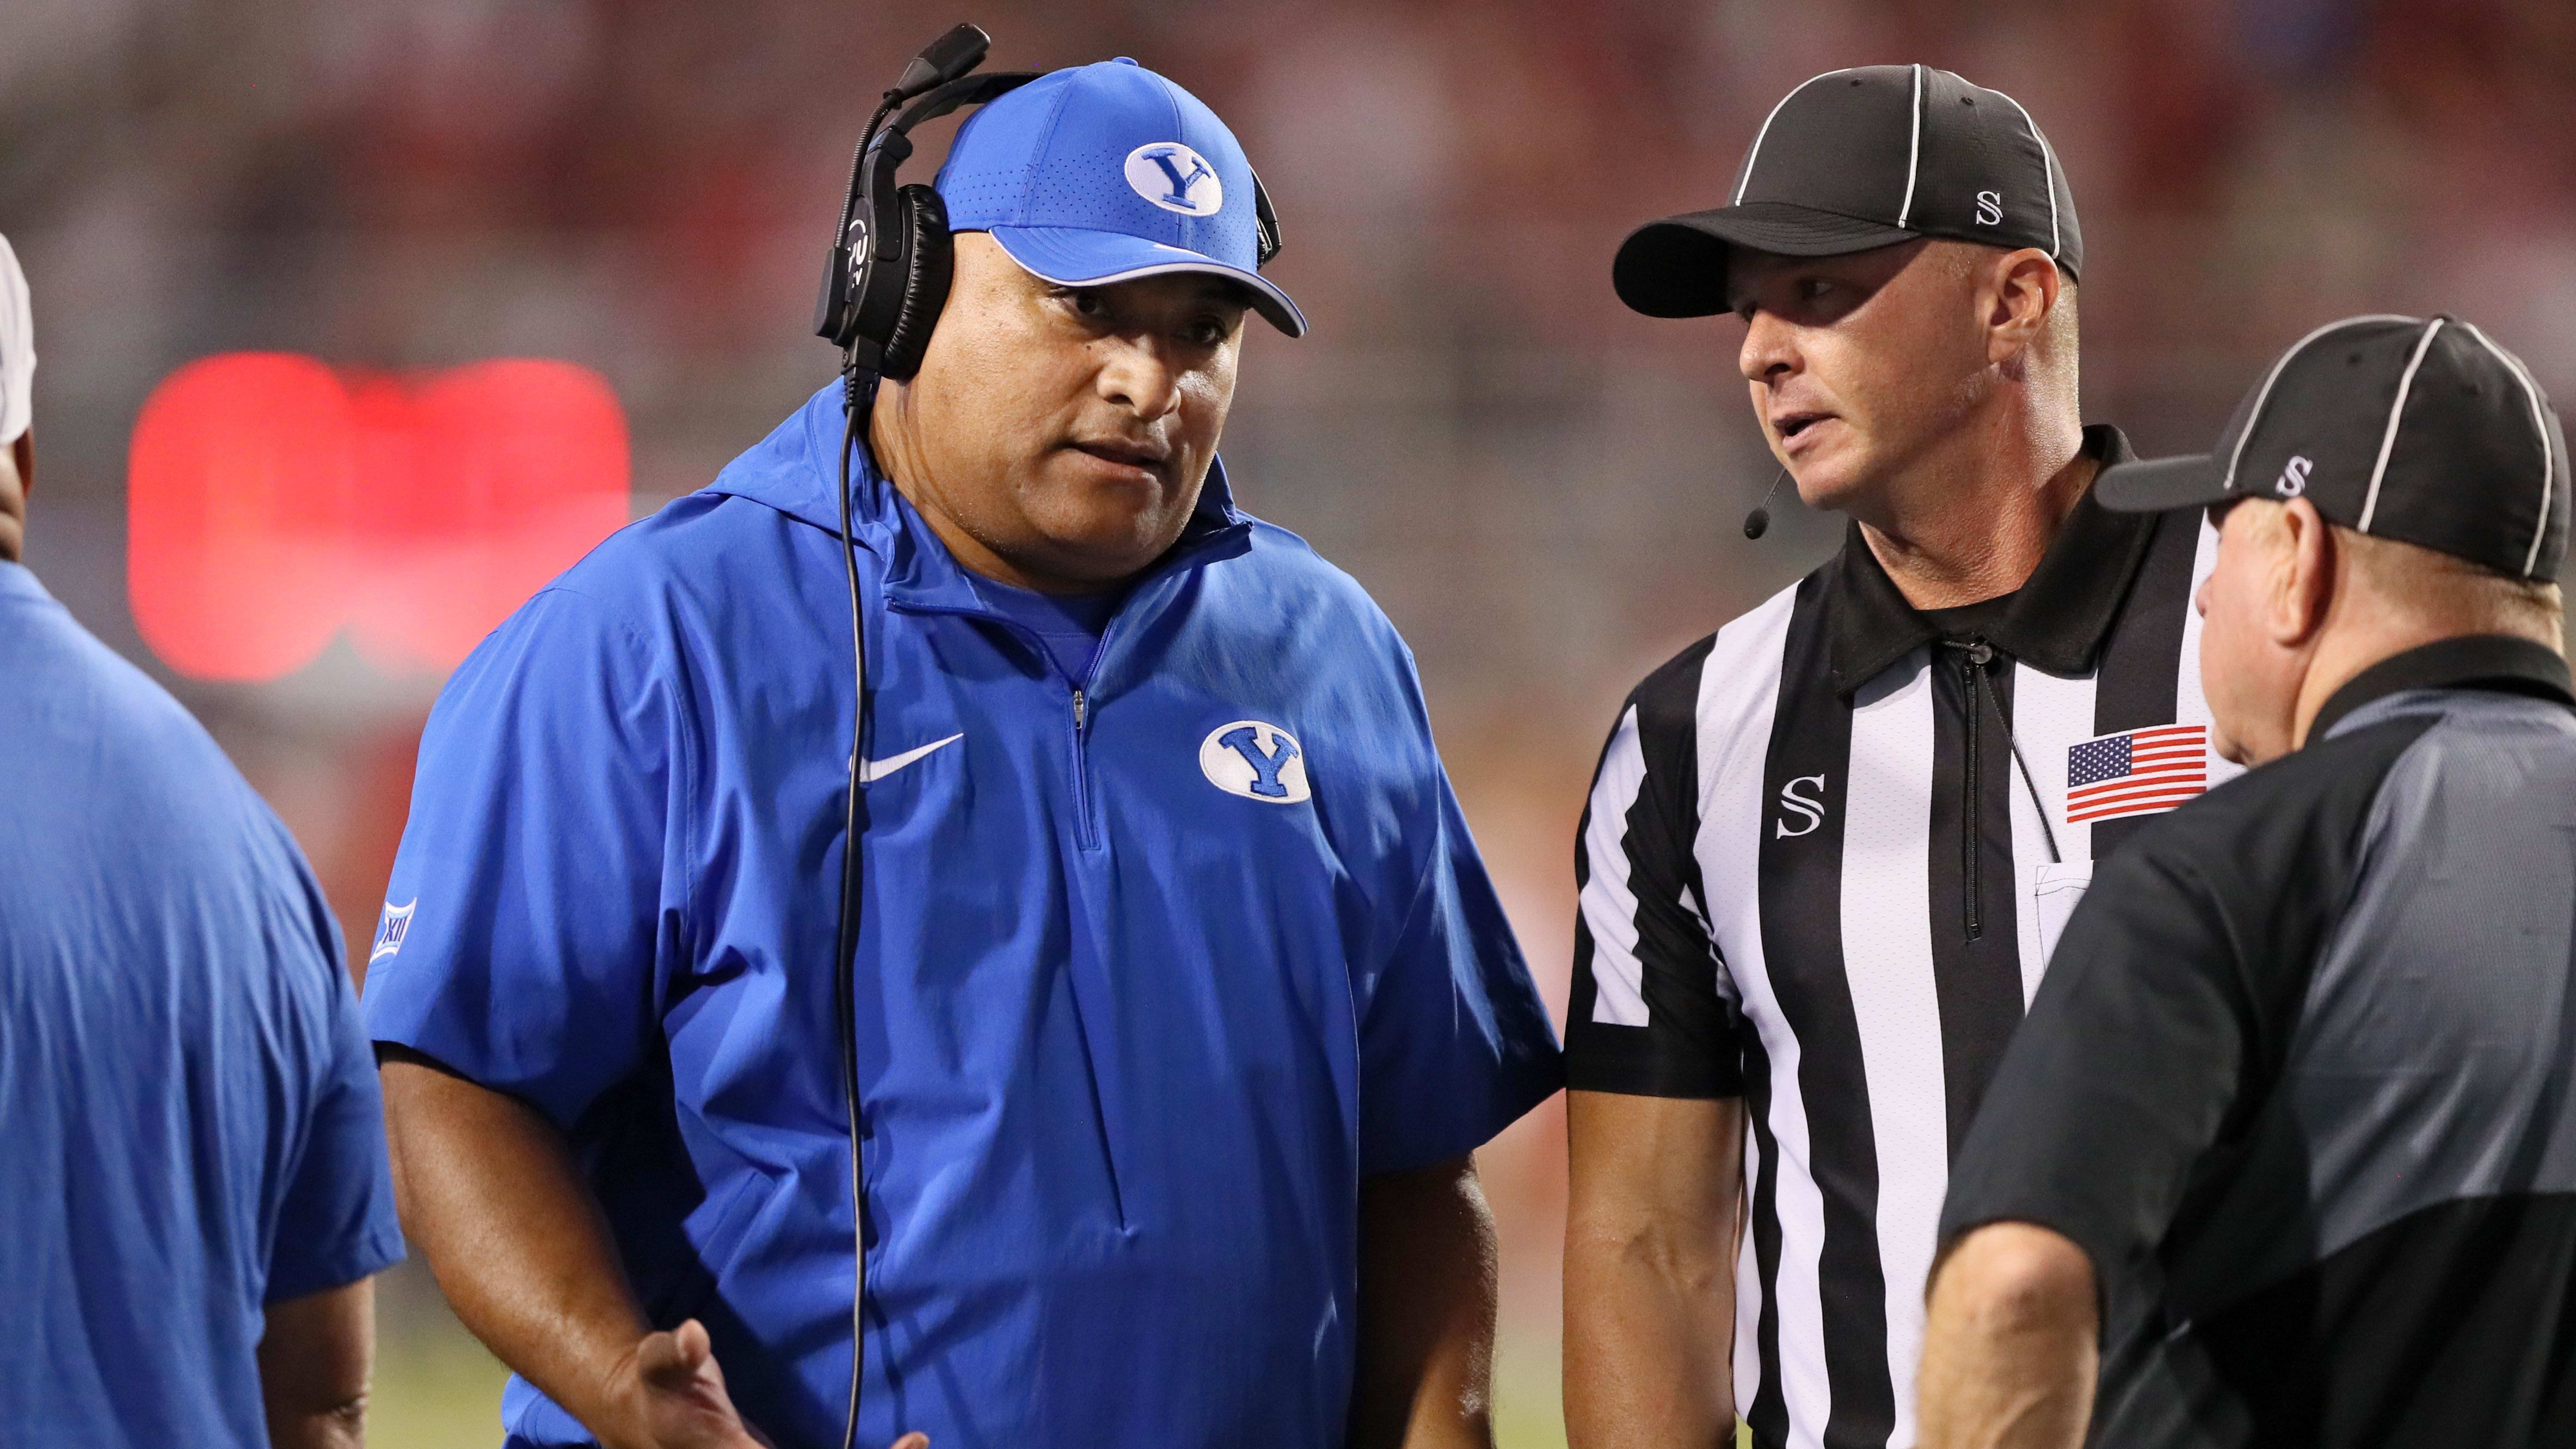 BYU Football: Kalani Sitake’s Decision to Decline Competing Offers Ensures Program Stability